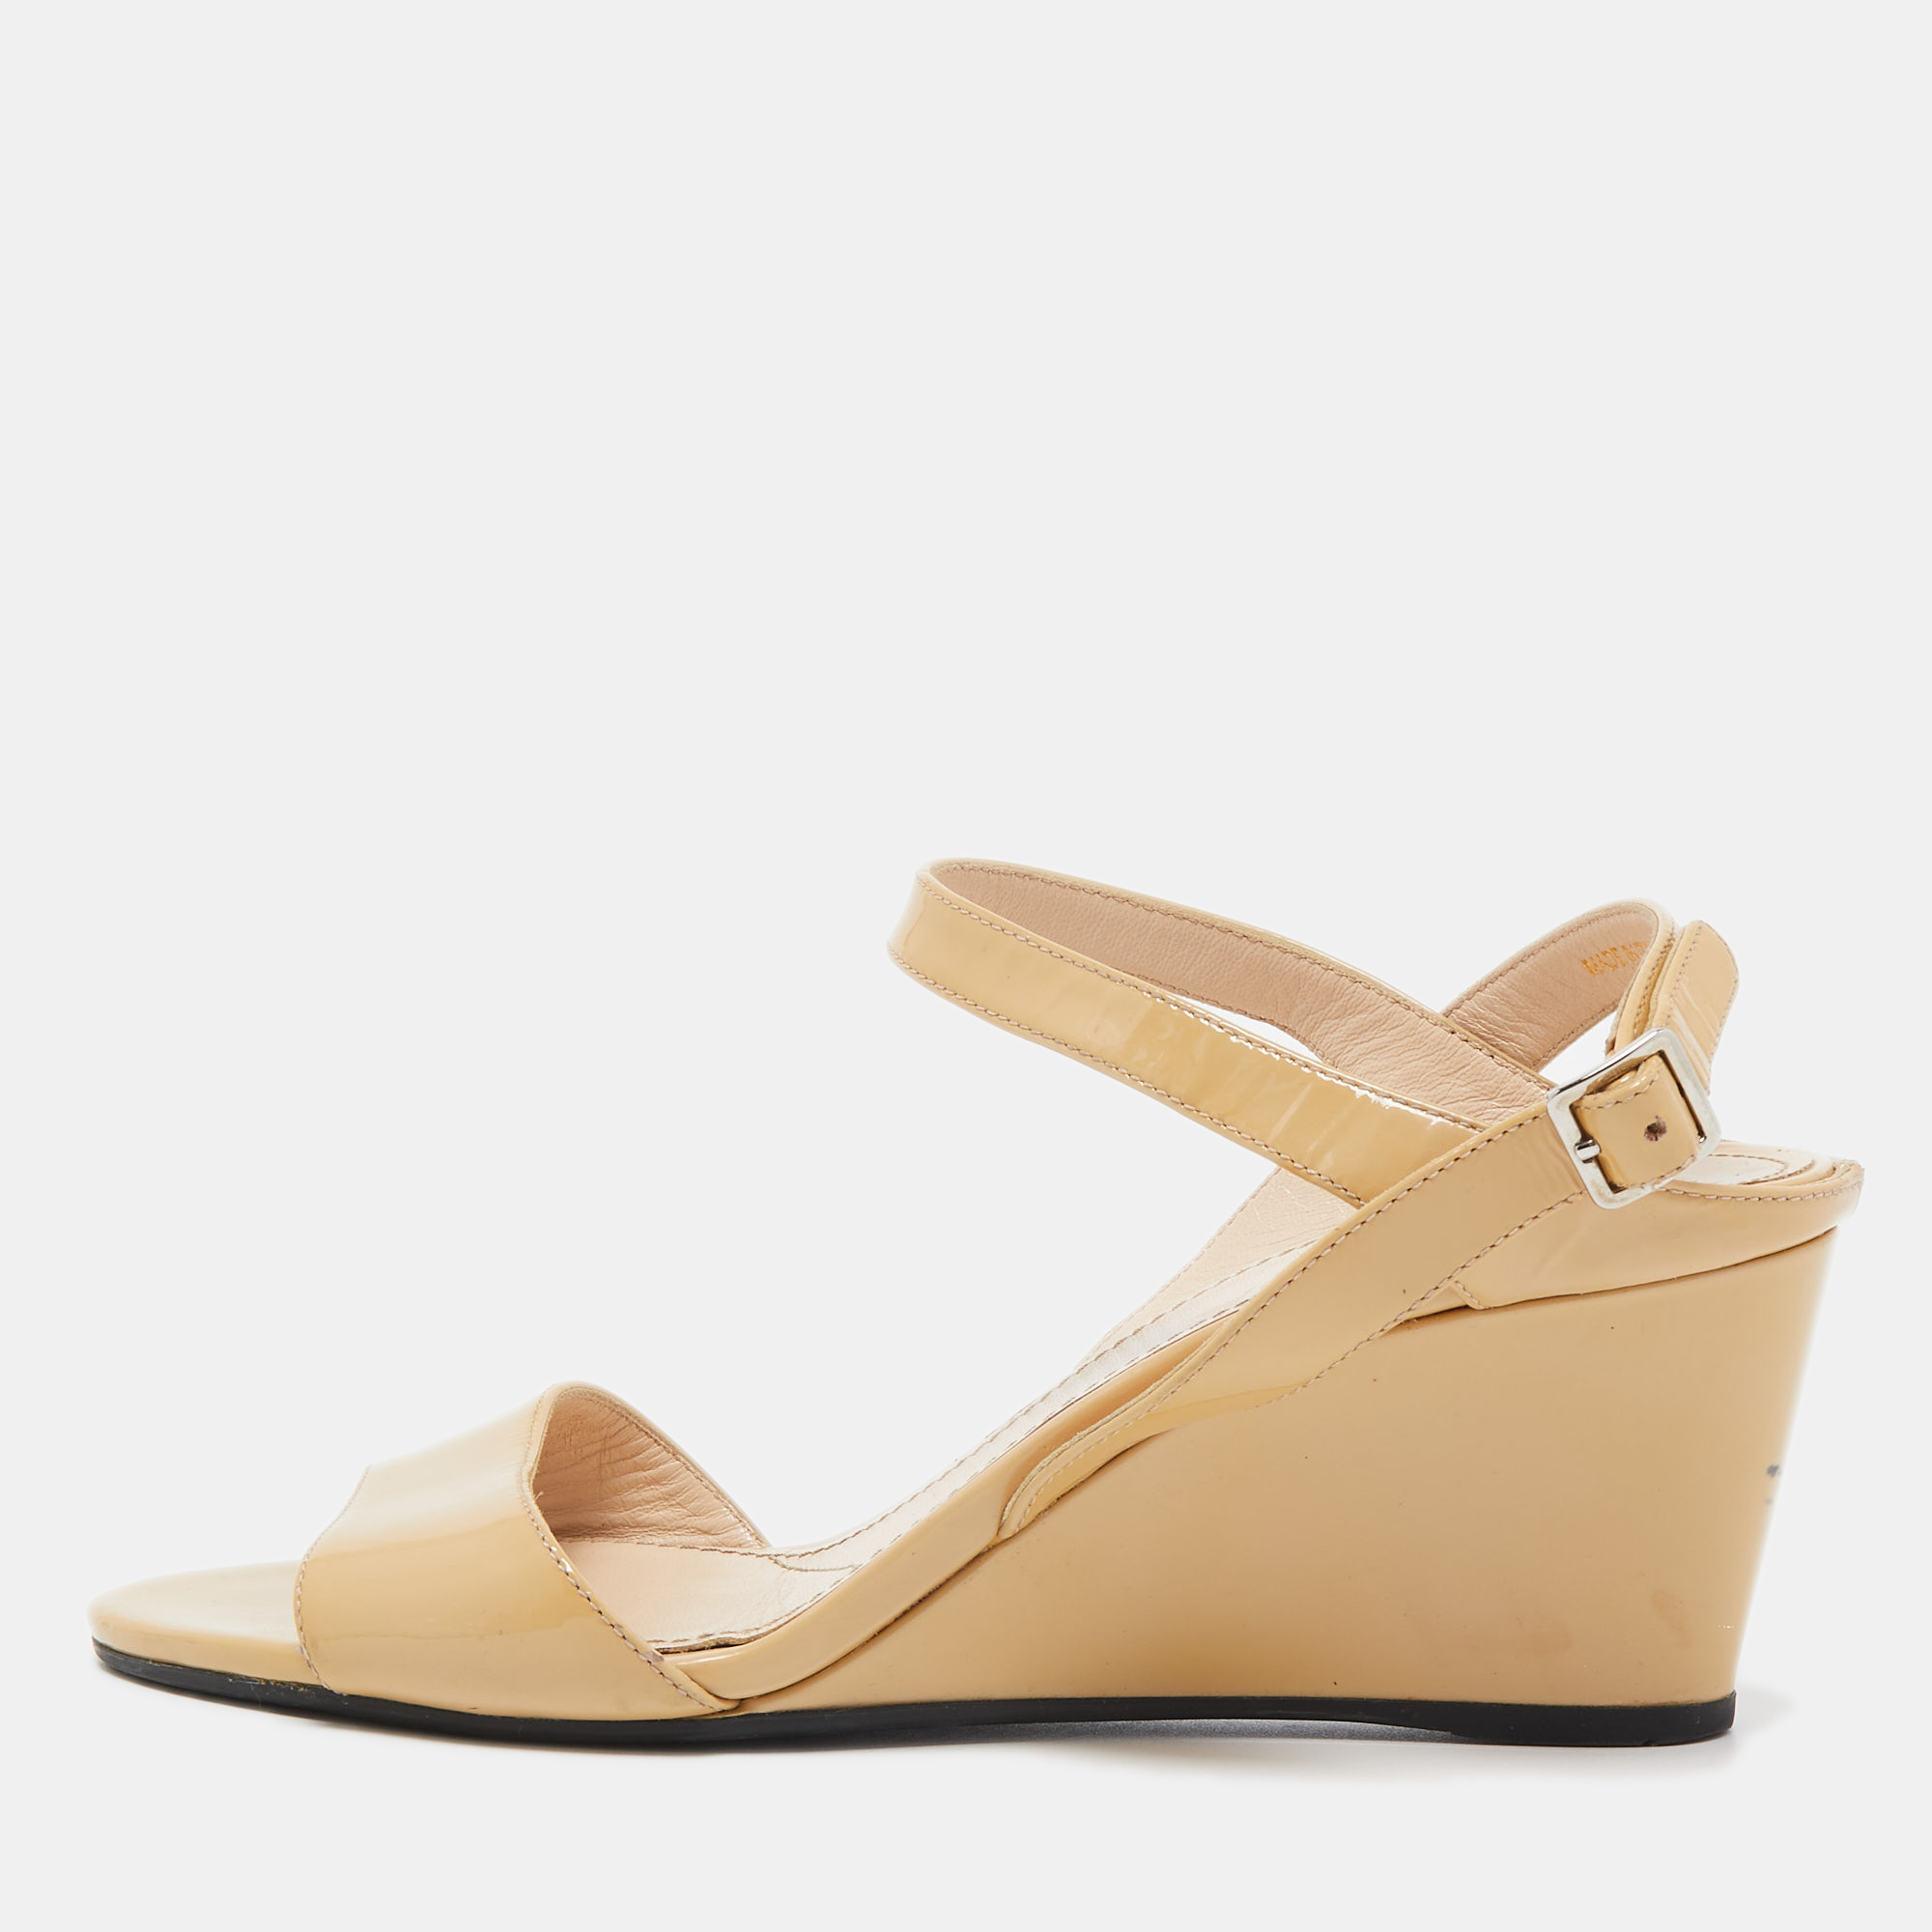 Prada Beige Patent Leather Wedge Ankle Strap Sandals Size 37.5